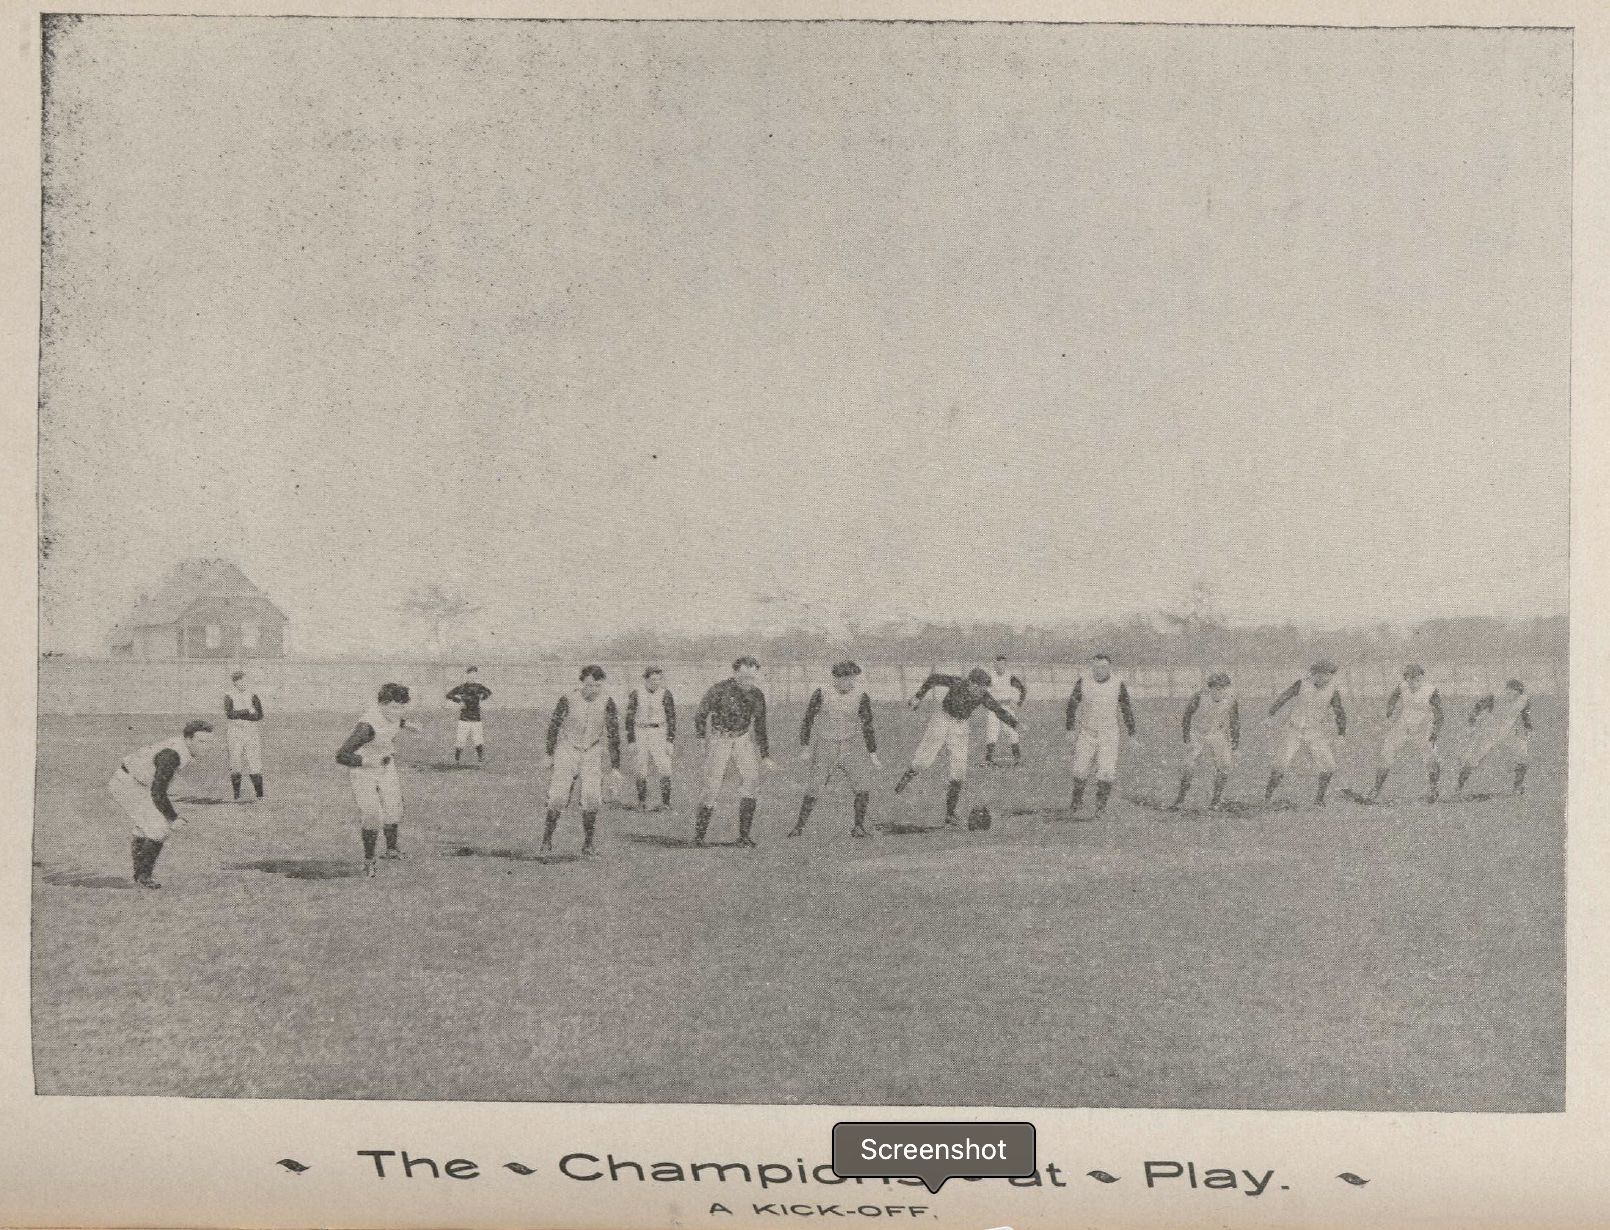 A football team on the field in a line for a kickoff. Text at bottom reads: The Champions at Play. A Kickoff."